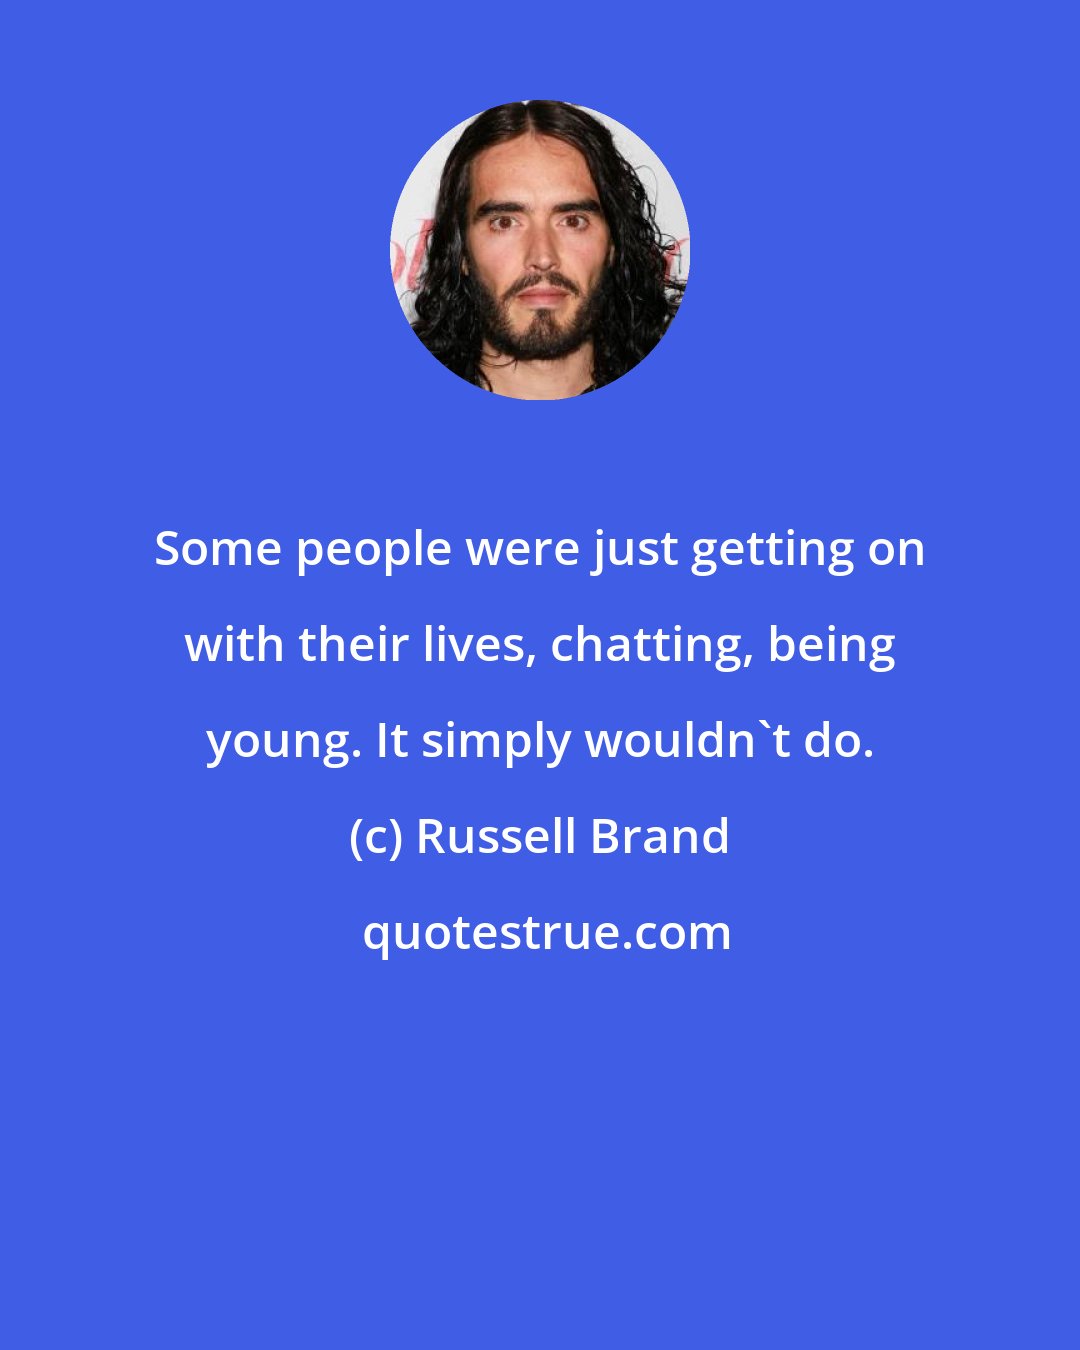 Russell Brand: Some people were just getting on with their lives, chatting, being young. It simply wouldn't do.